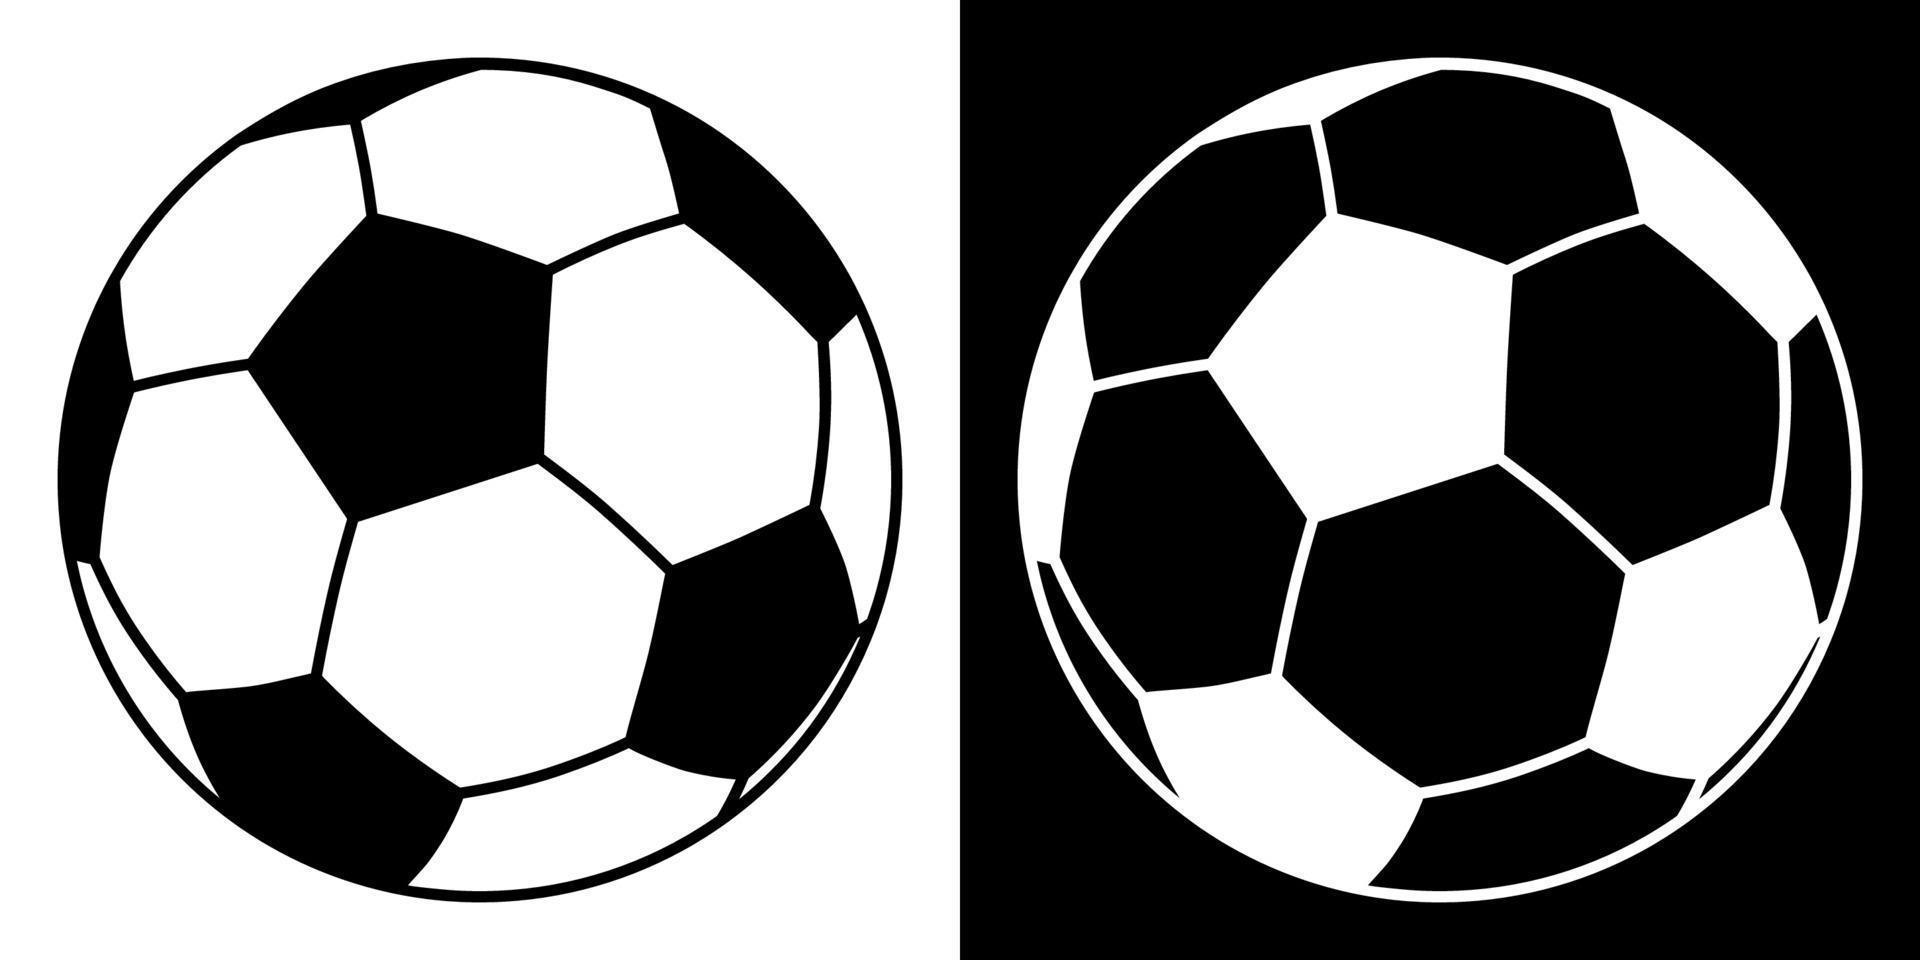 Black and white classic soccer ball icon. Isolated vector on white background